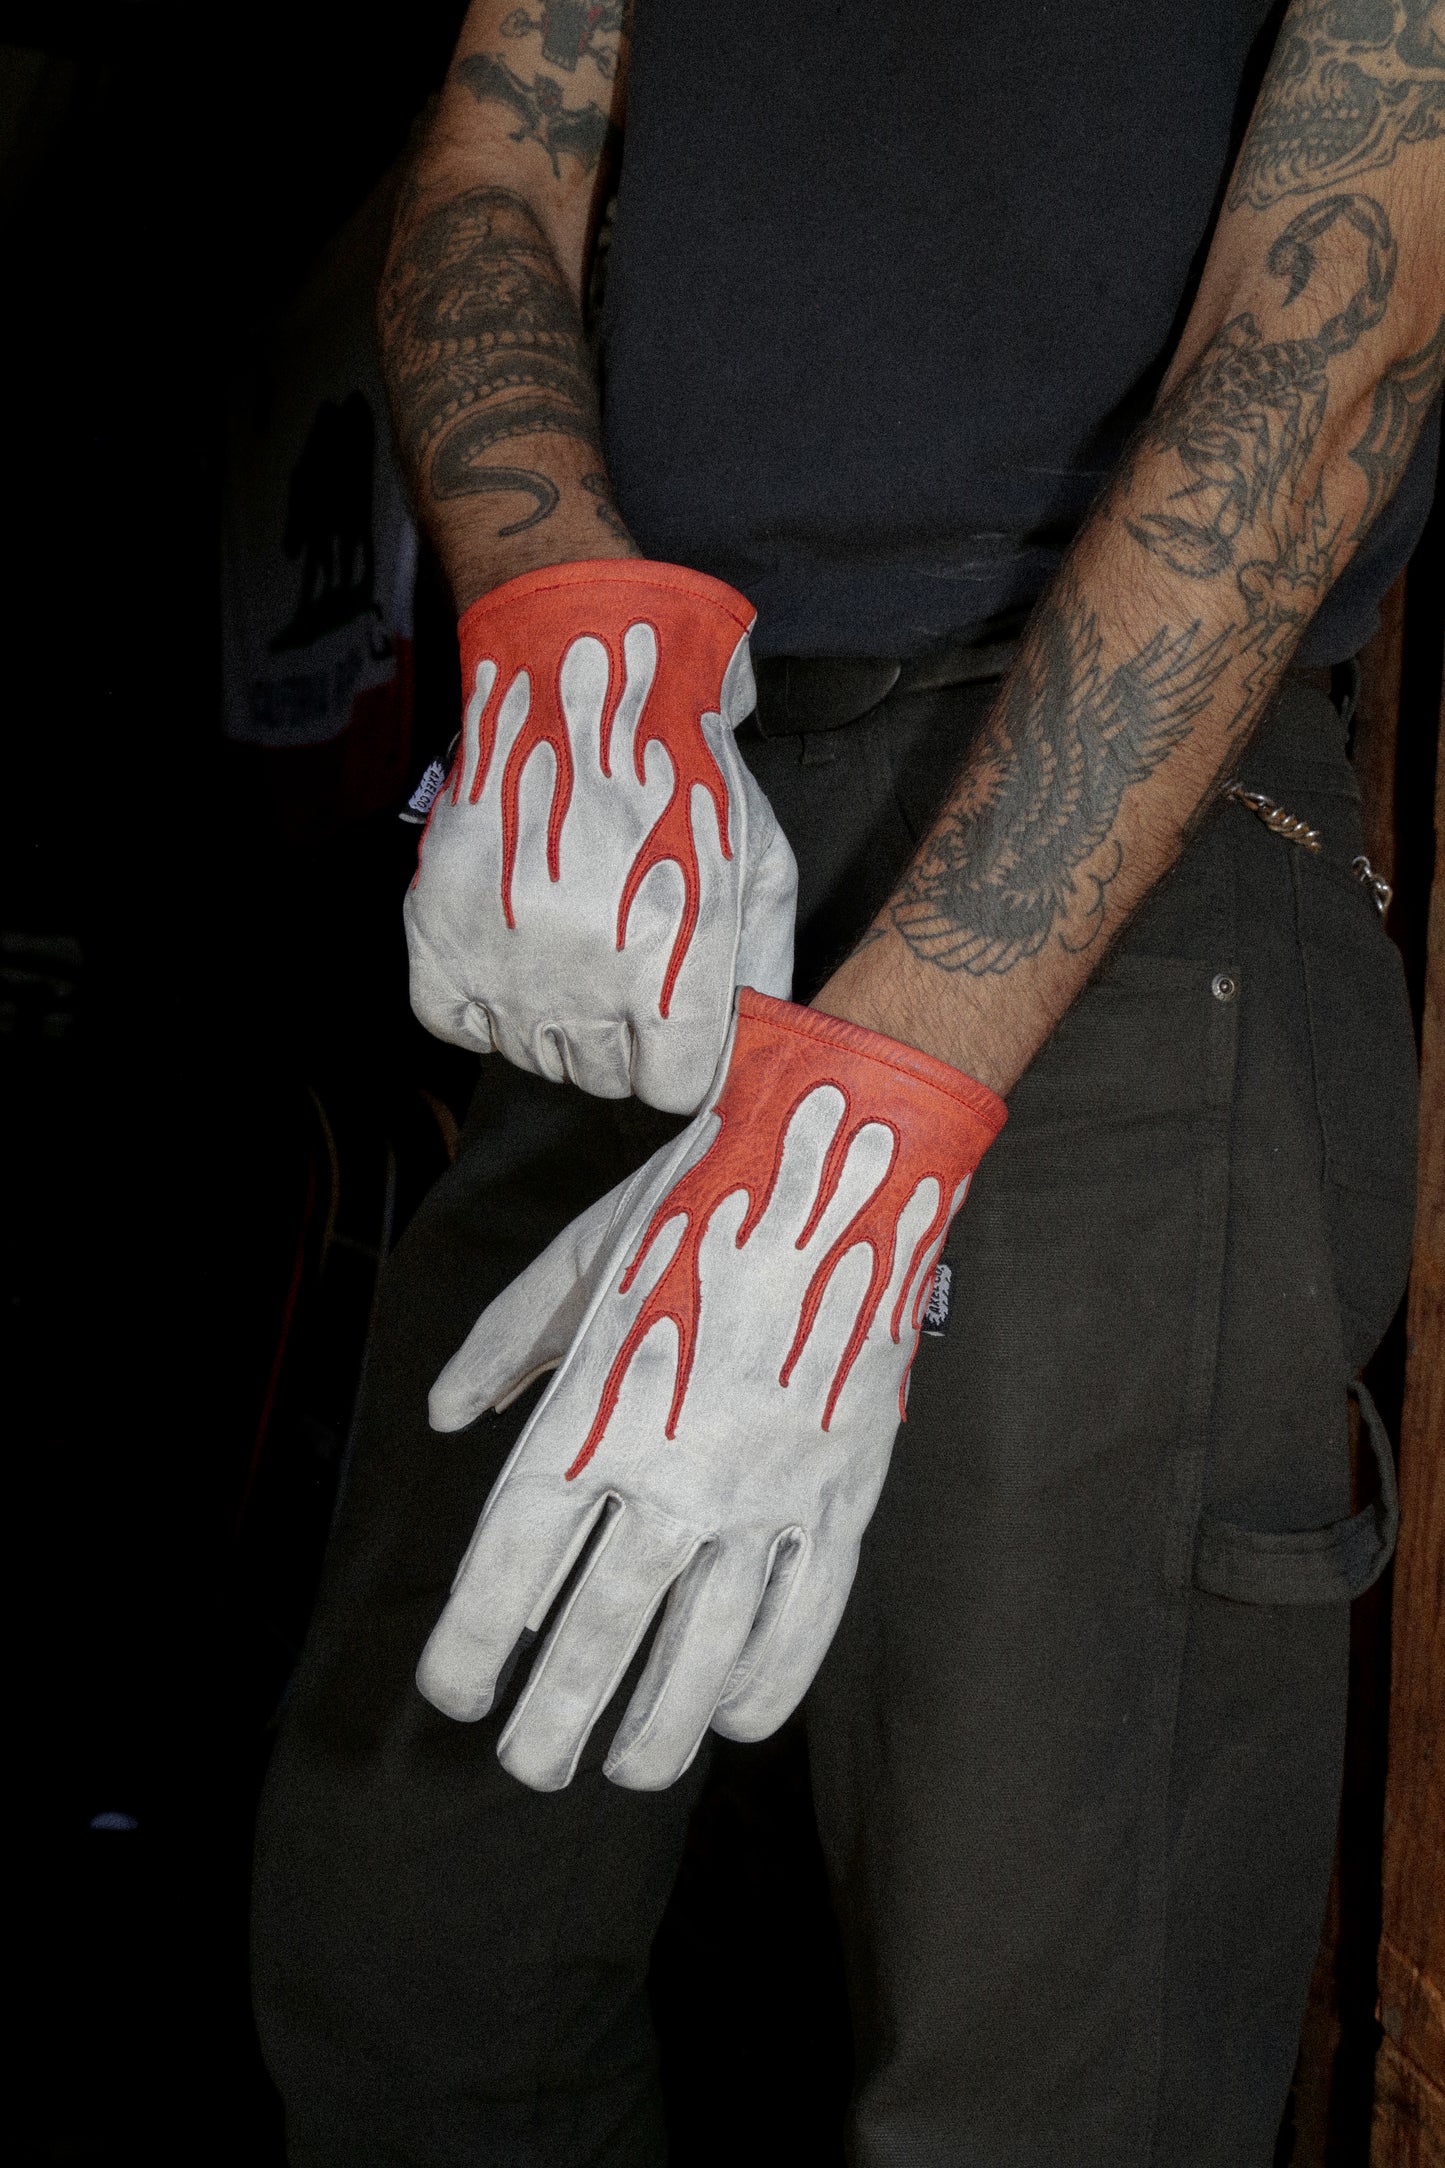 RED FLAMED WHITE COWHIDE GLOVES